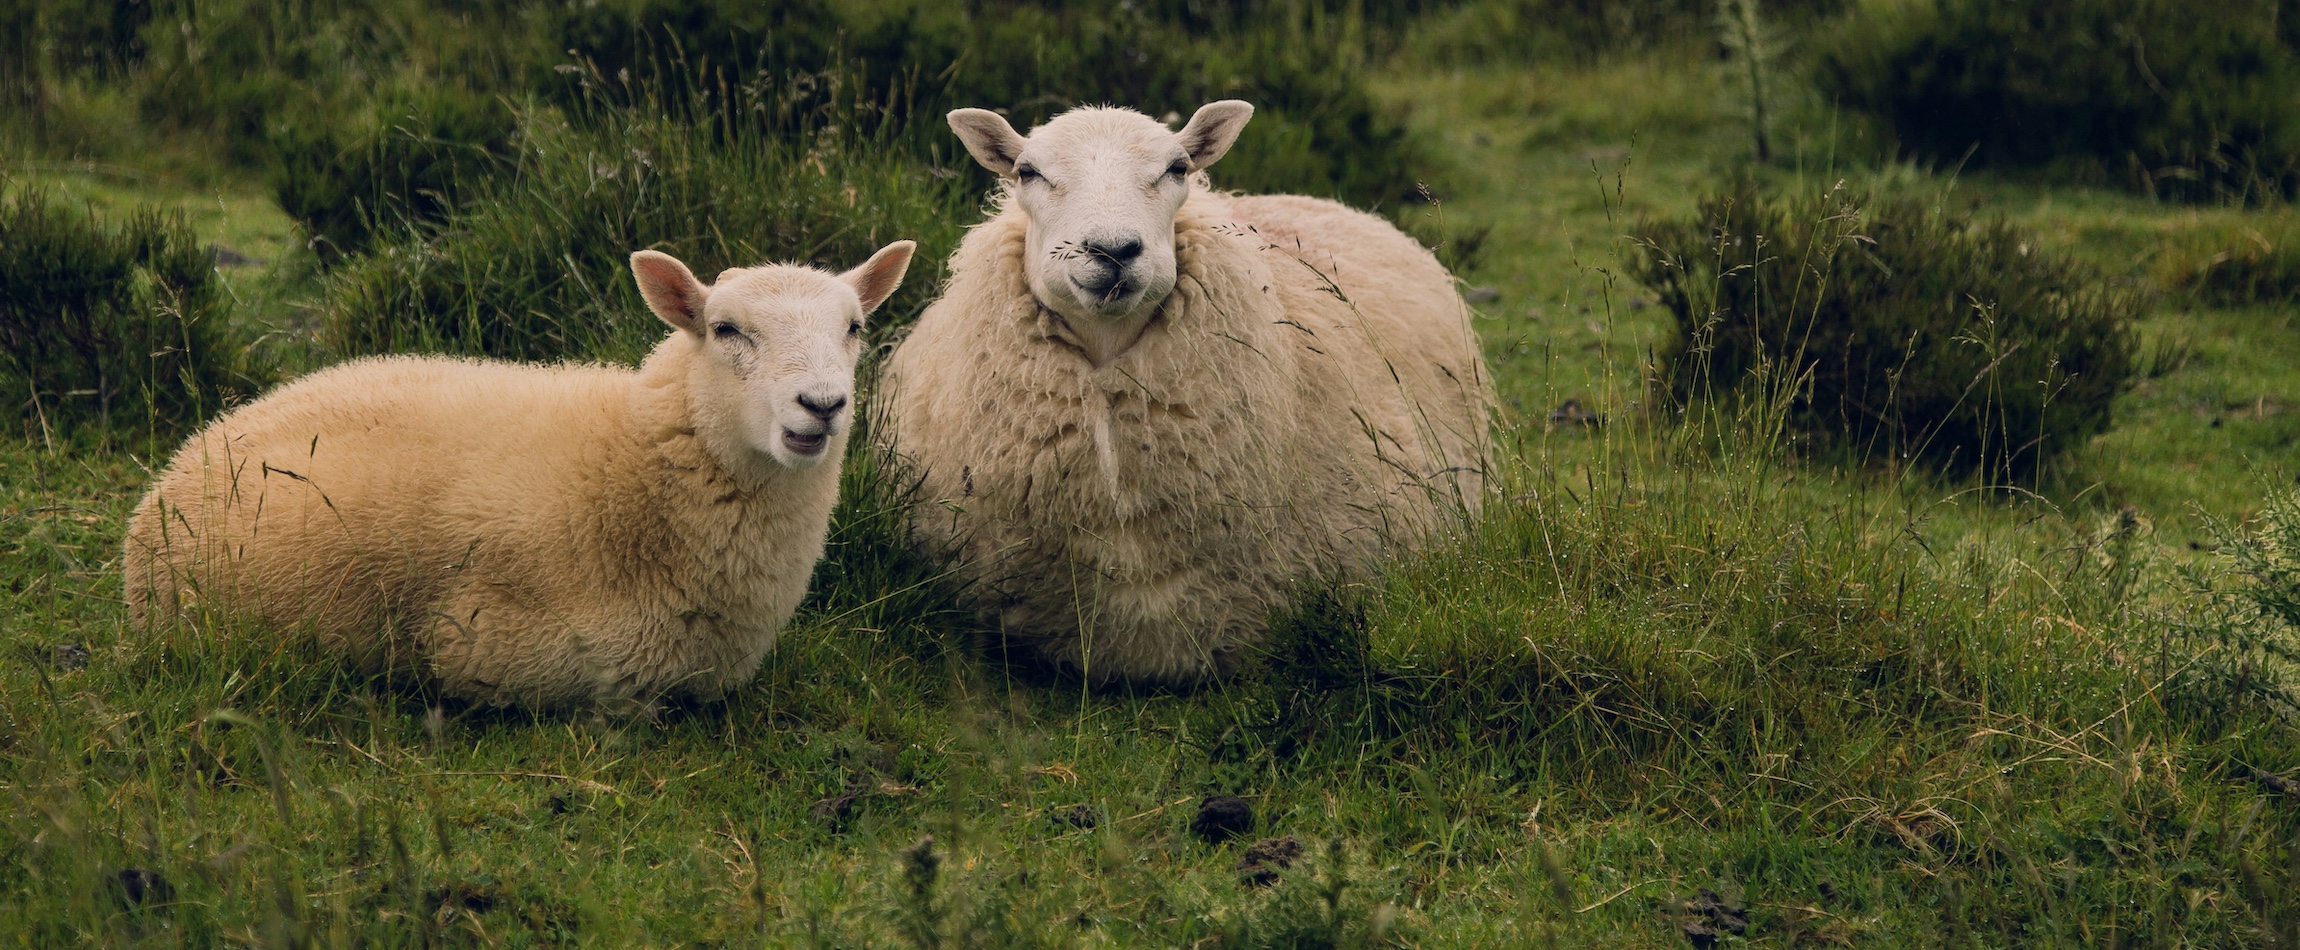 two sheep in the grass